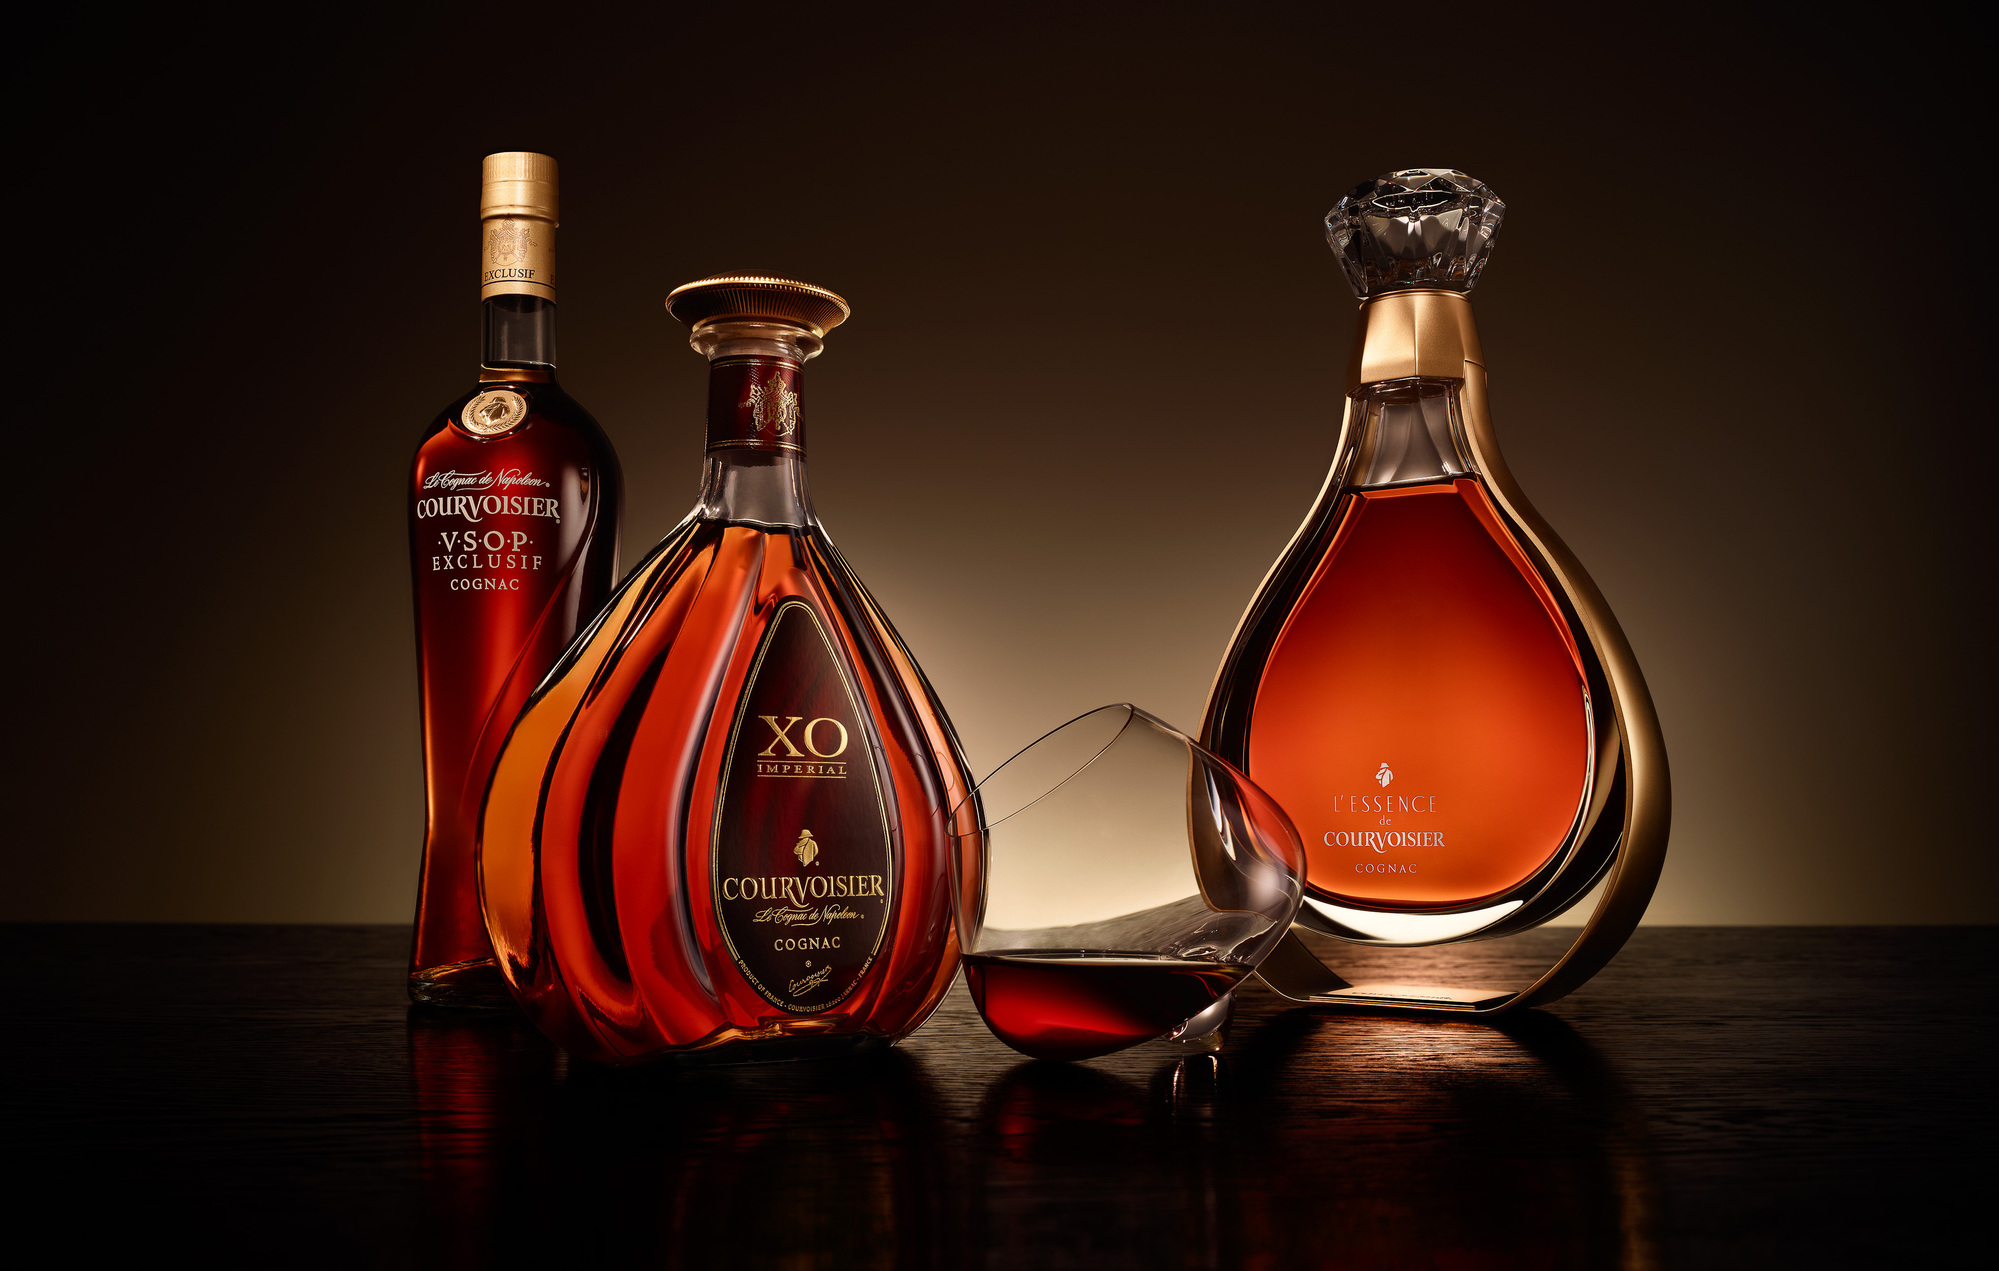 Courvoisier bottle photography. Beverage and liquid product & advertising photography by Timothy Hogan Studio in Los Angeles